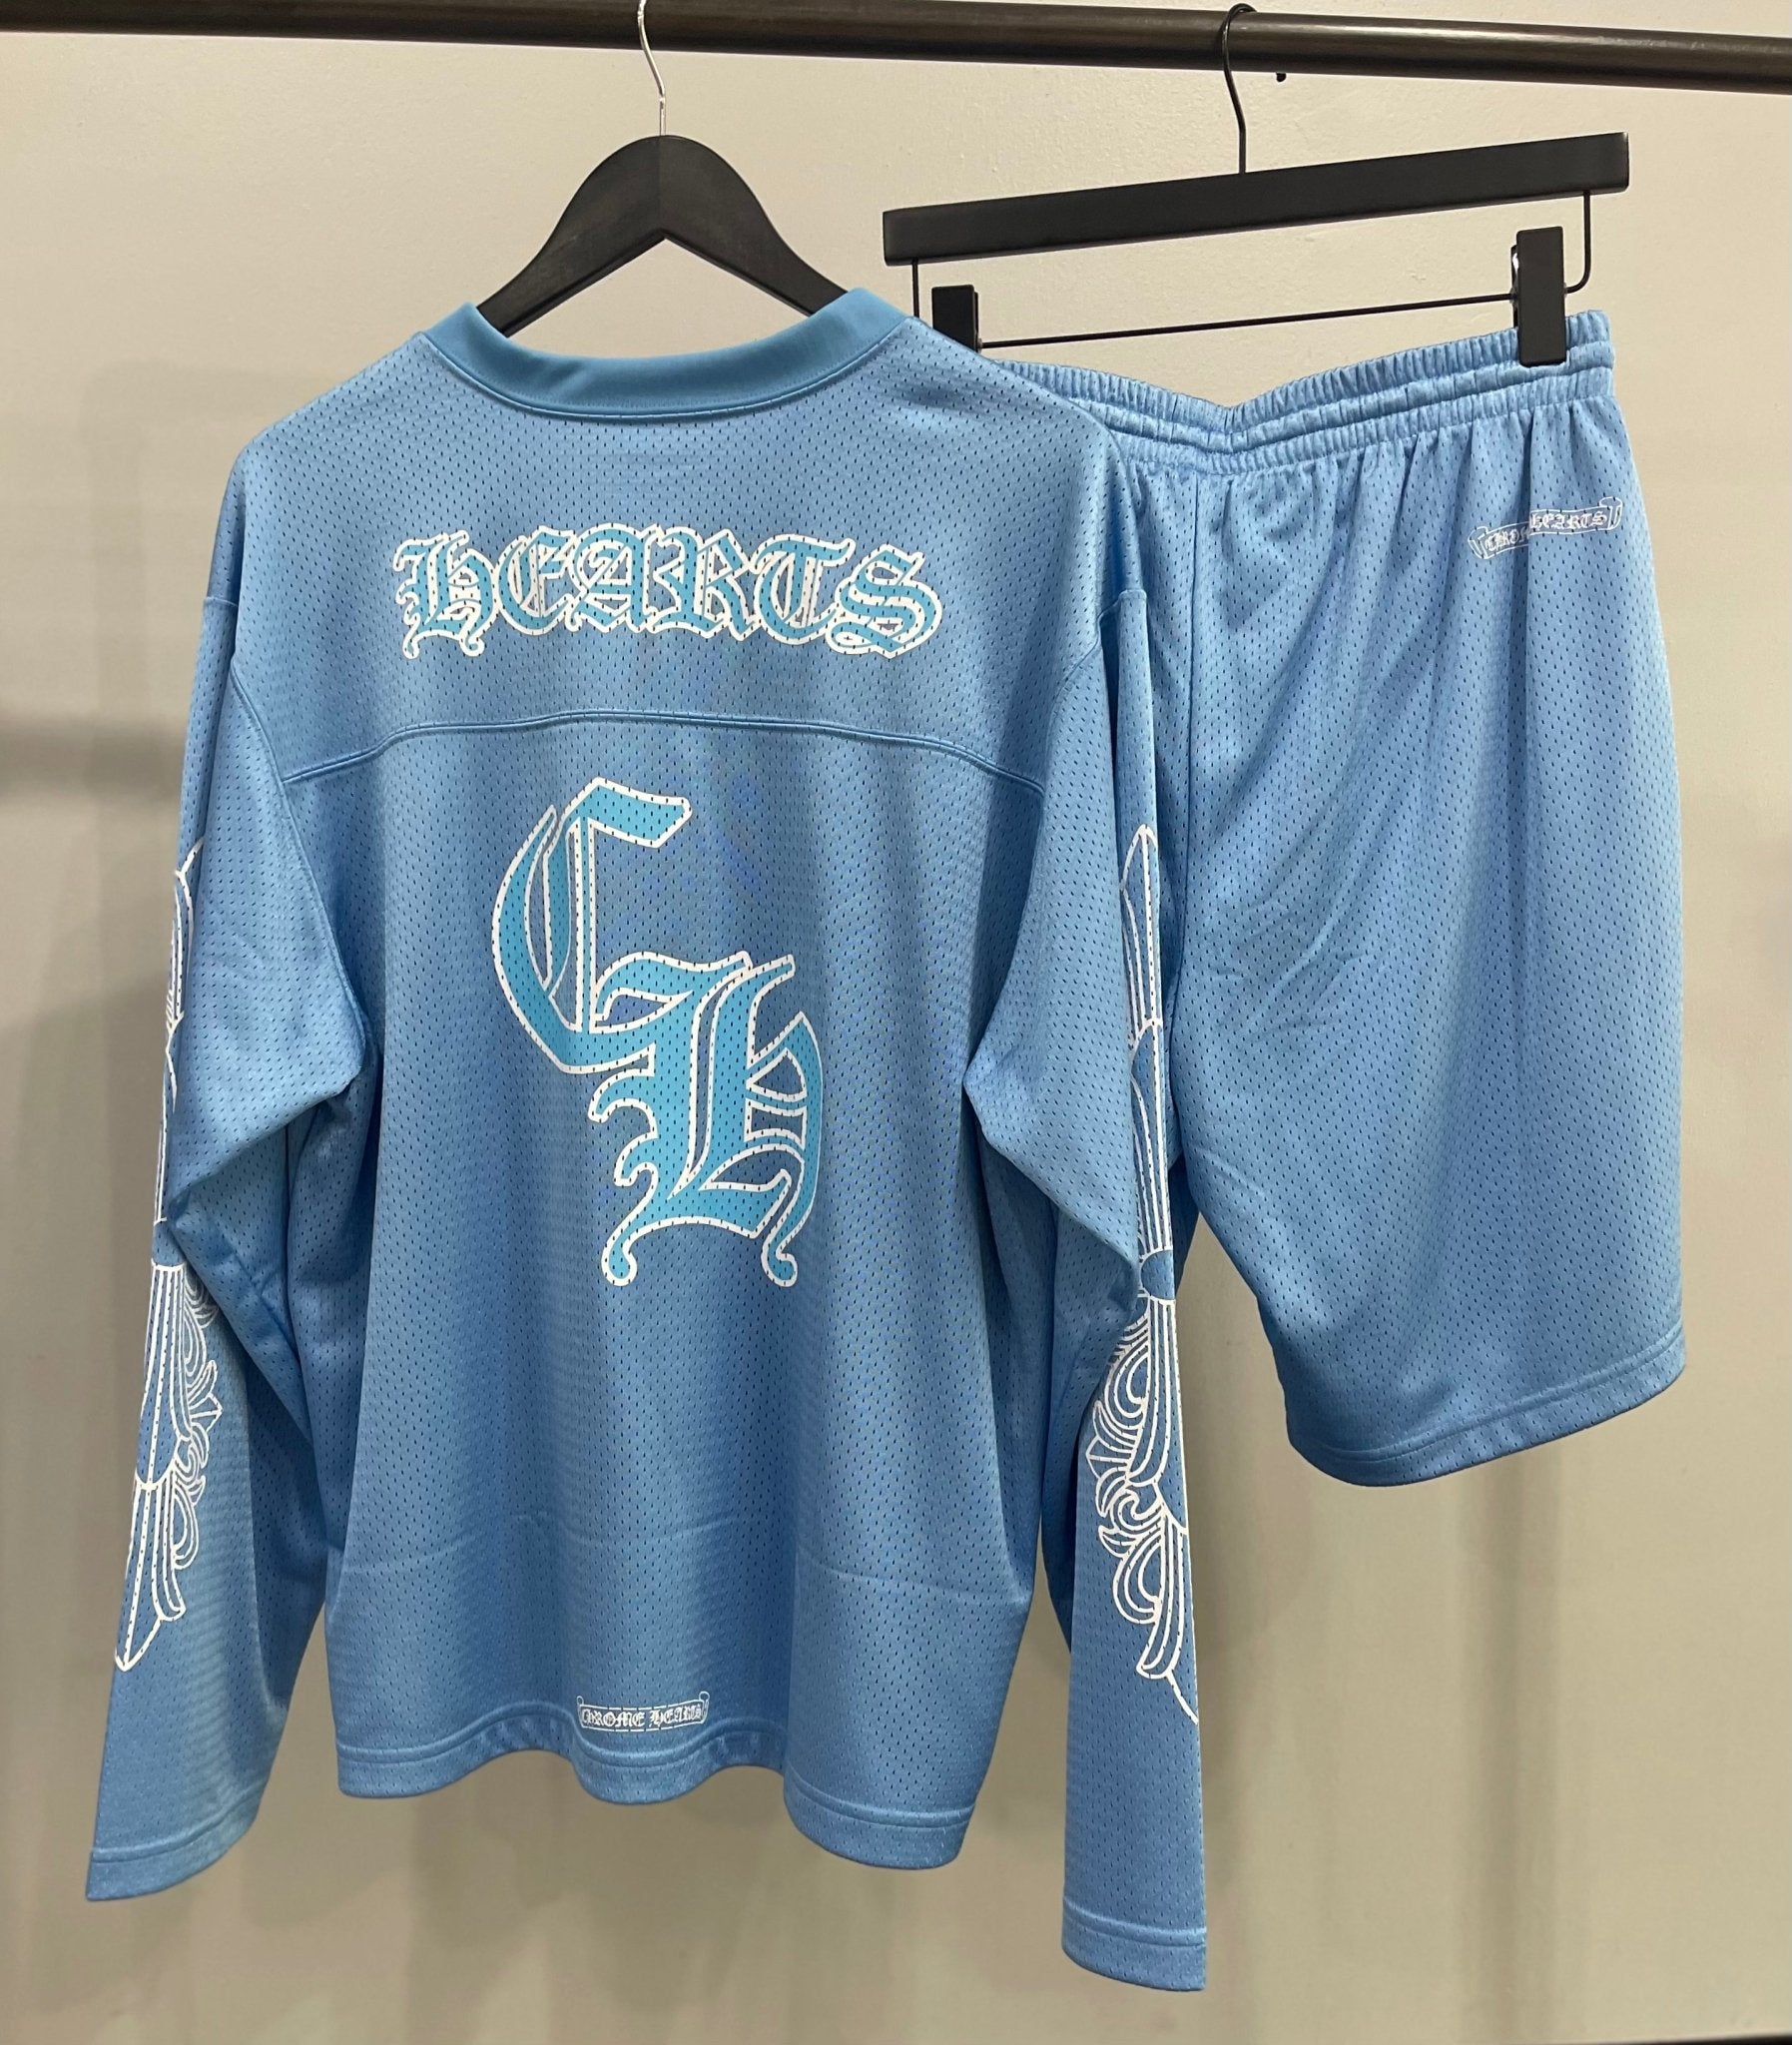 Chrome Hearts Sports Mesh Warm Up Jersey Blue-Supra Sneakers-$830.00